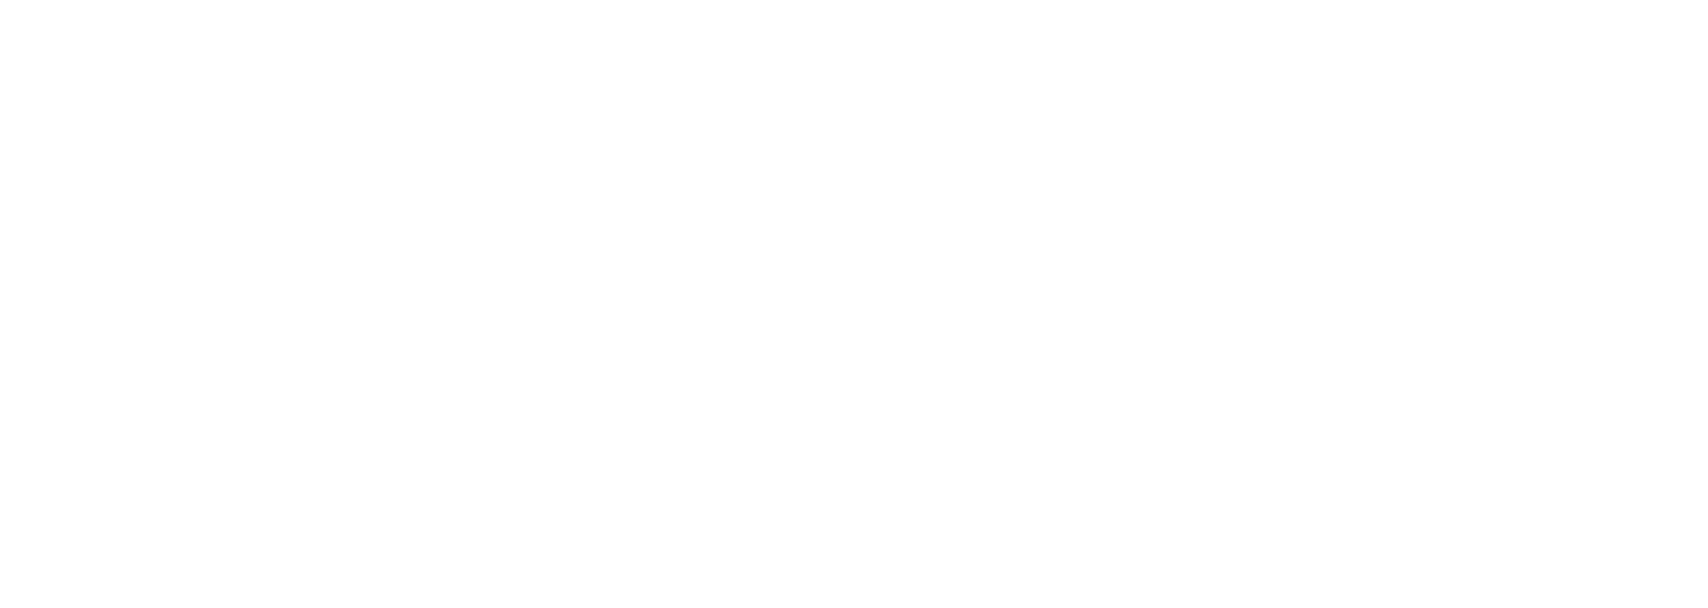 Office of Work Based Learning and Apprenticeship logo